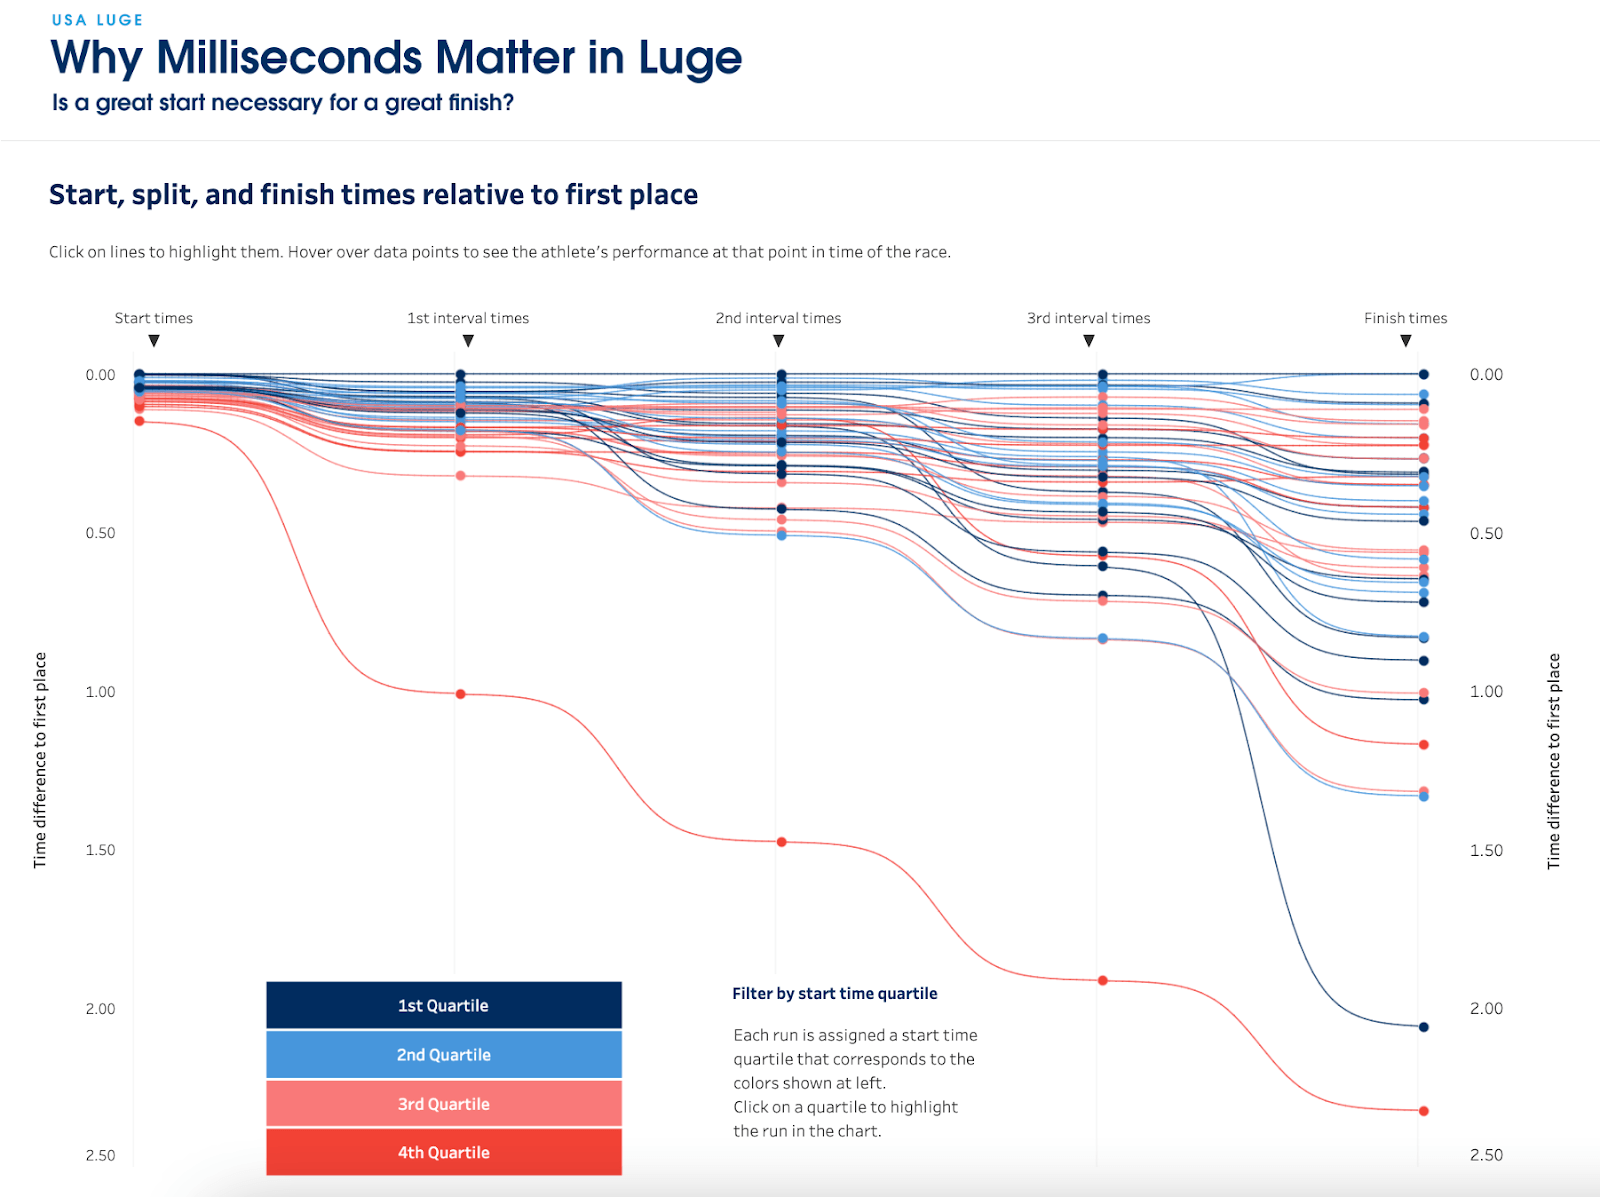 Luge start, split, and finish times relative to first place